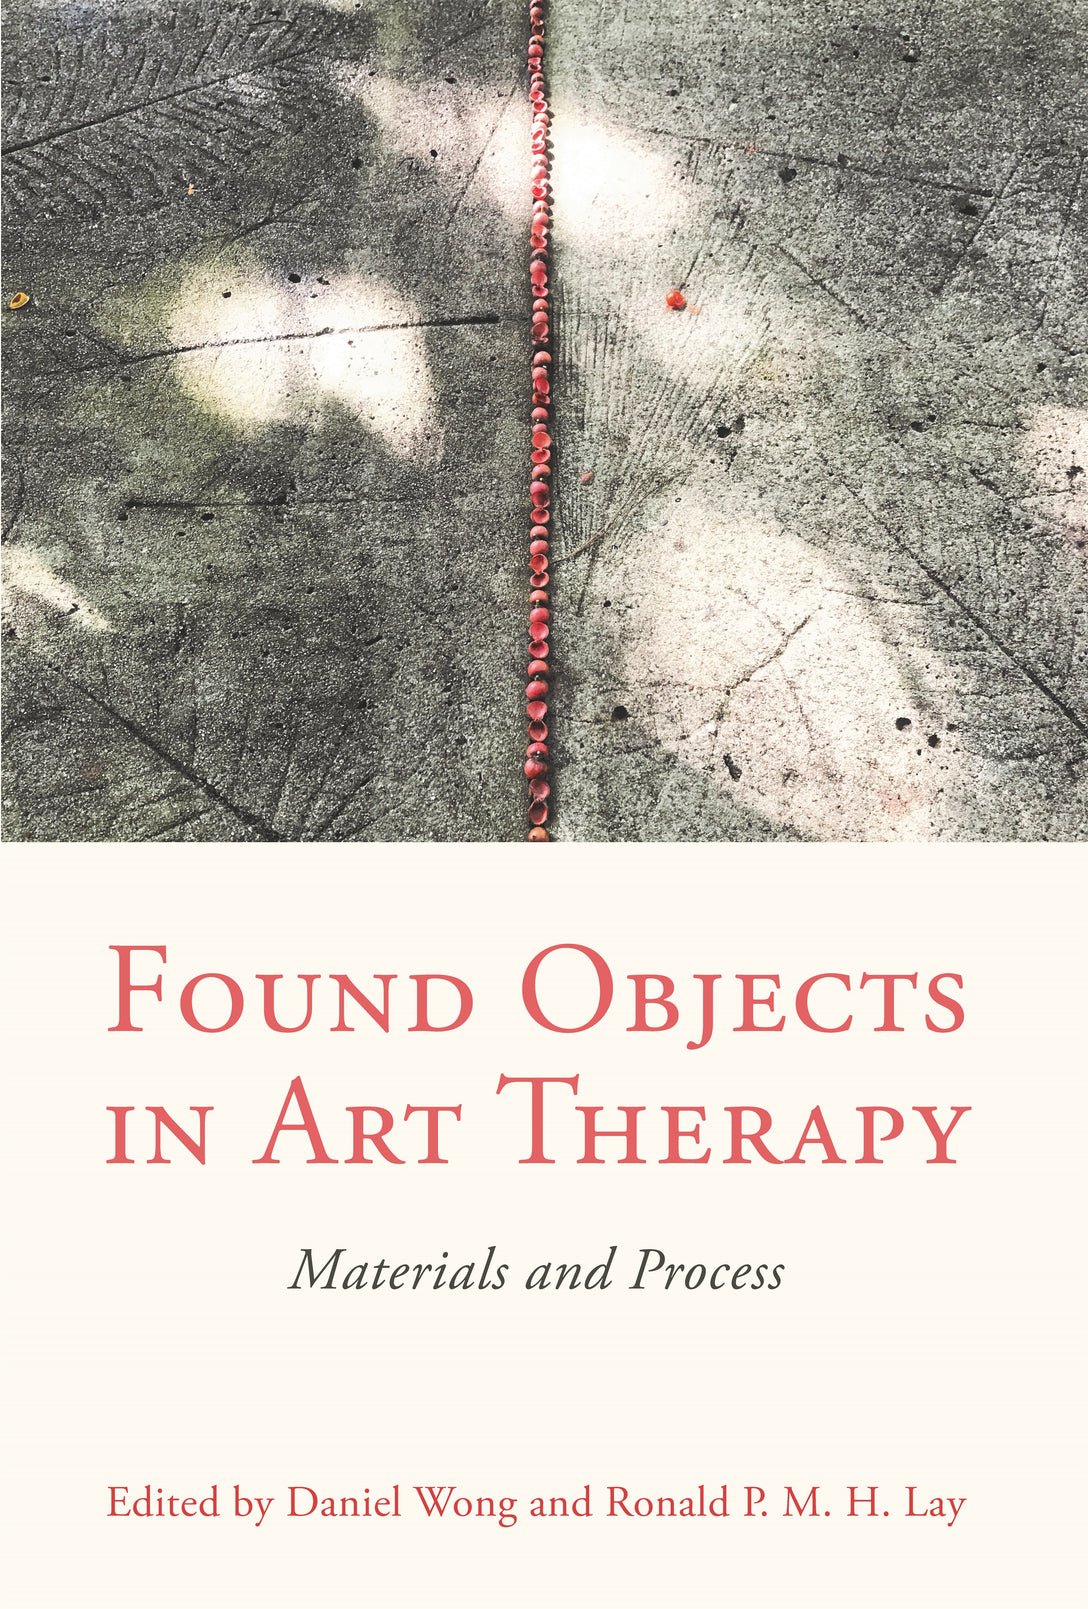 Found Objects in Art Therapy by Daniel Wong, Ronald Lay, No Author Listed